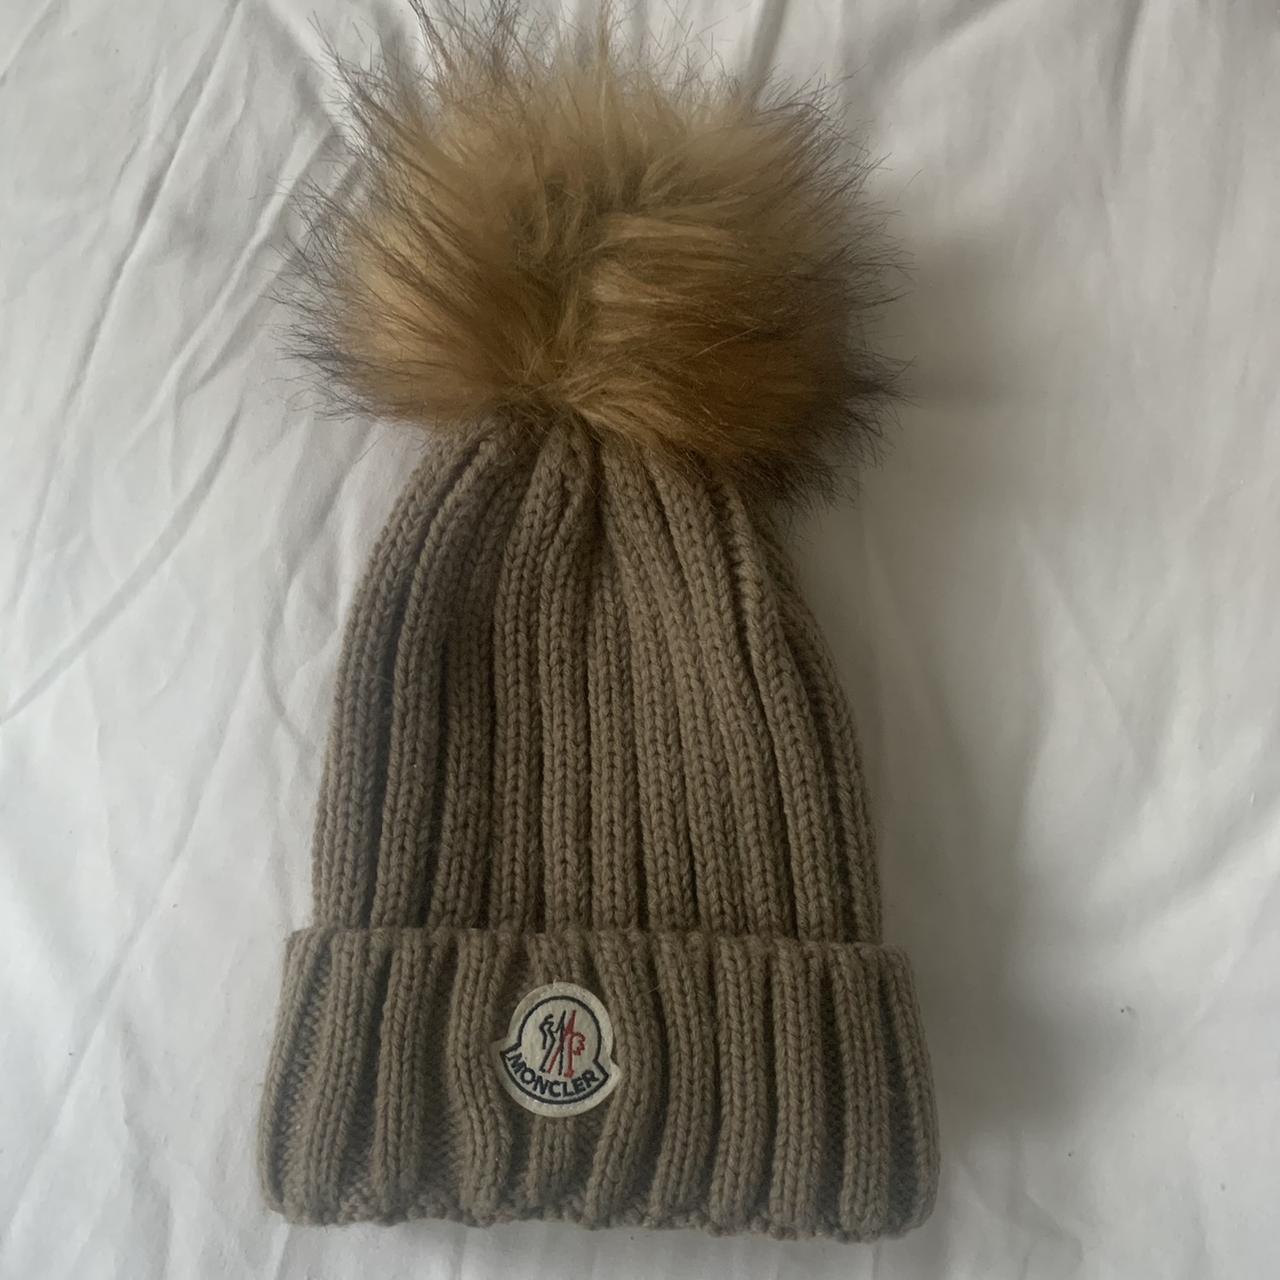 Beige / brown Moncler hat given as a gift but don’t... - Depop